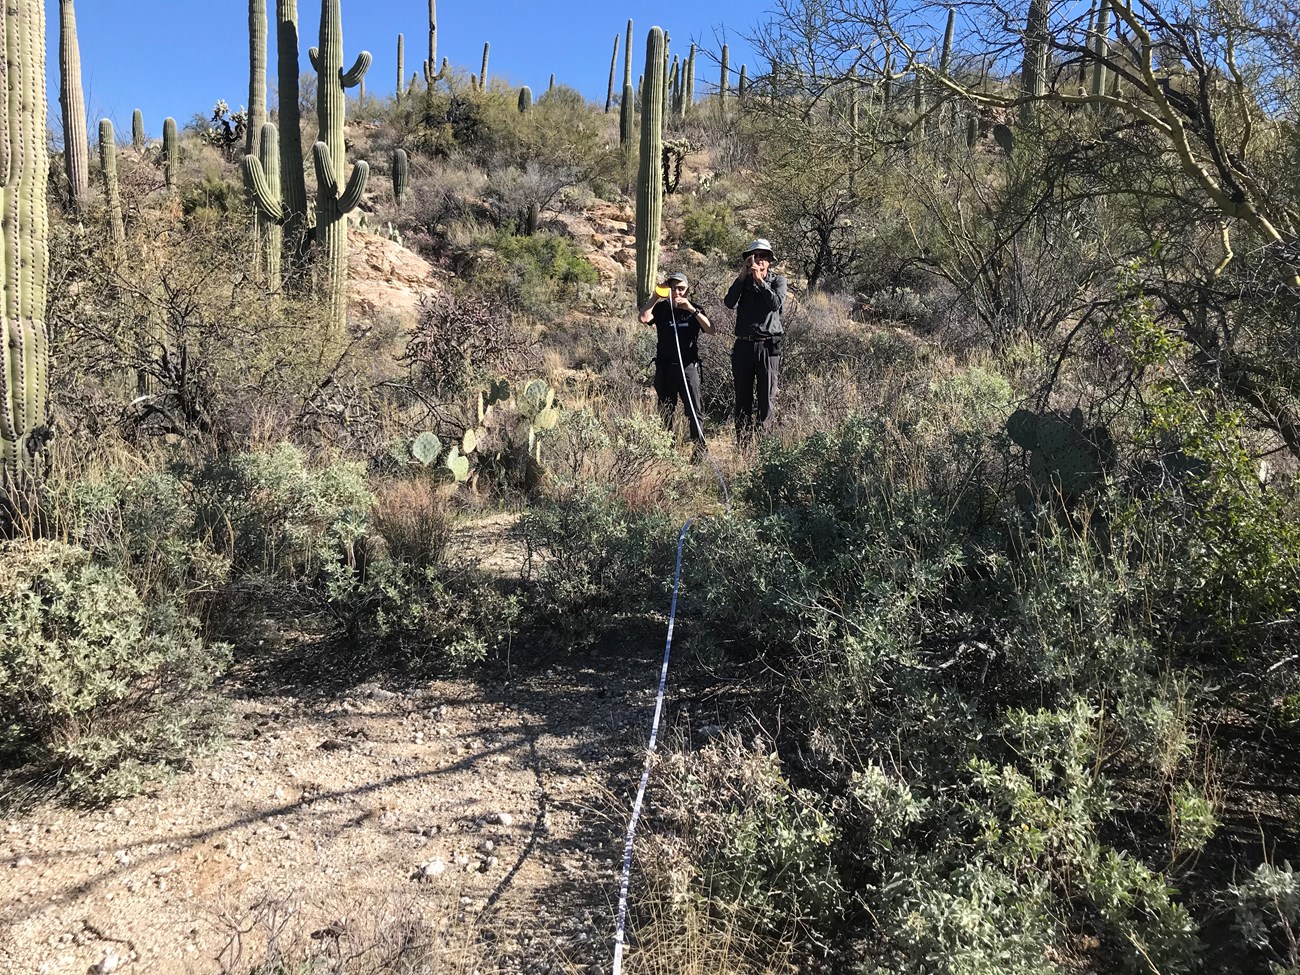 Volunteers using a clinometer to measure the height of a tall saguaro.